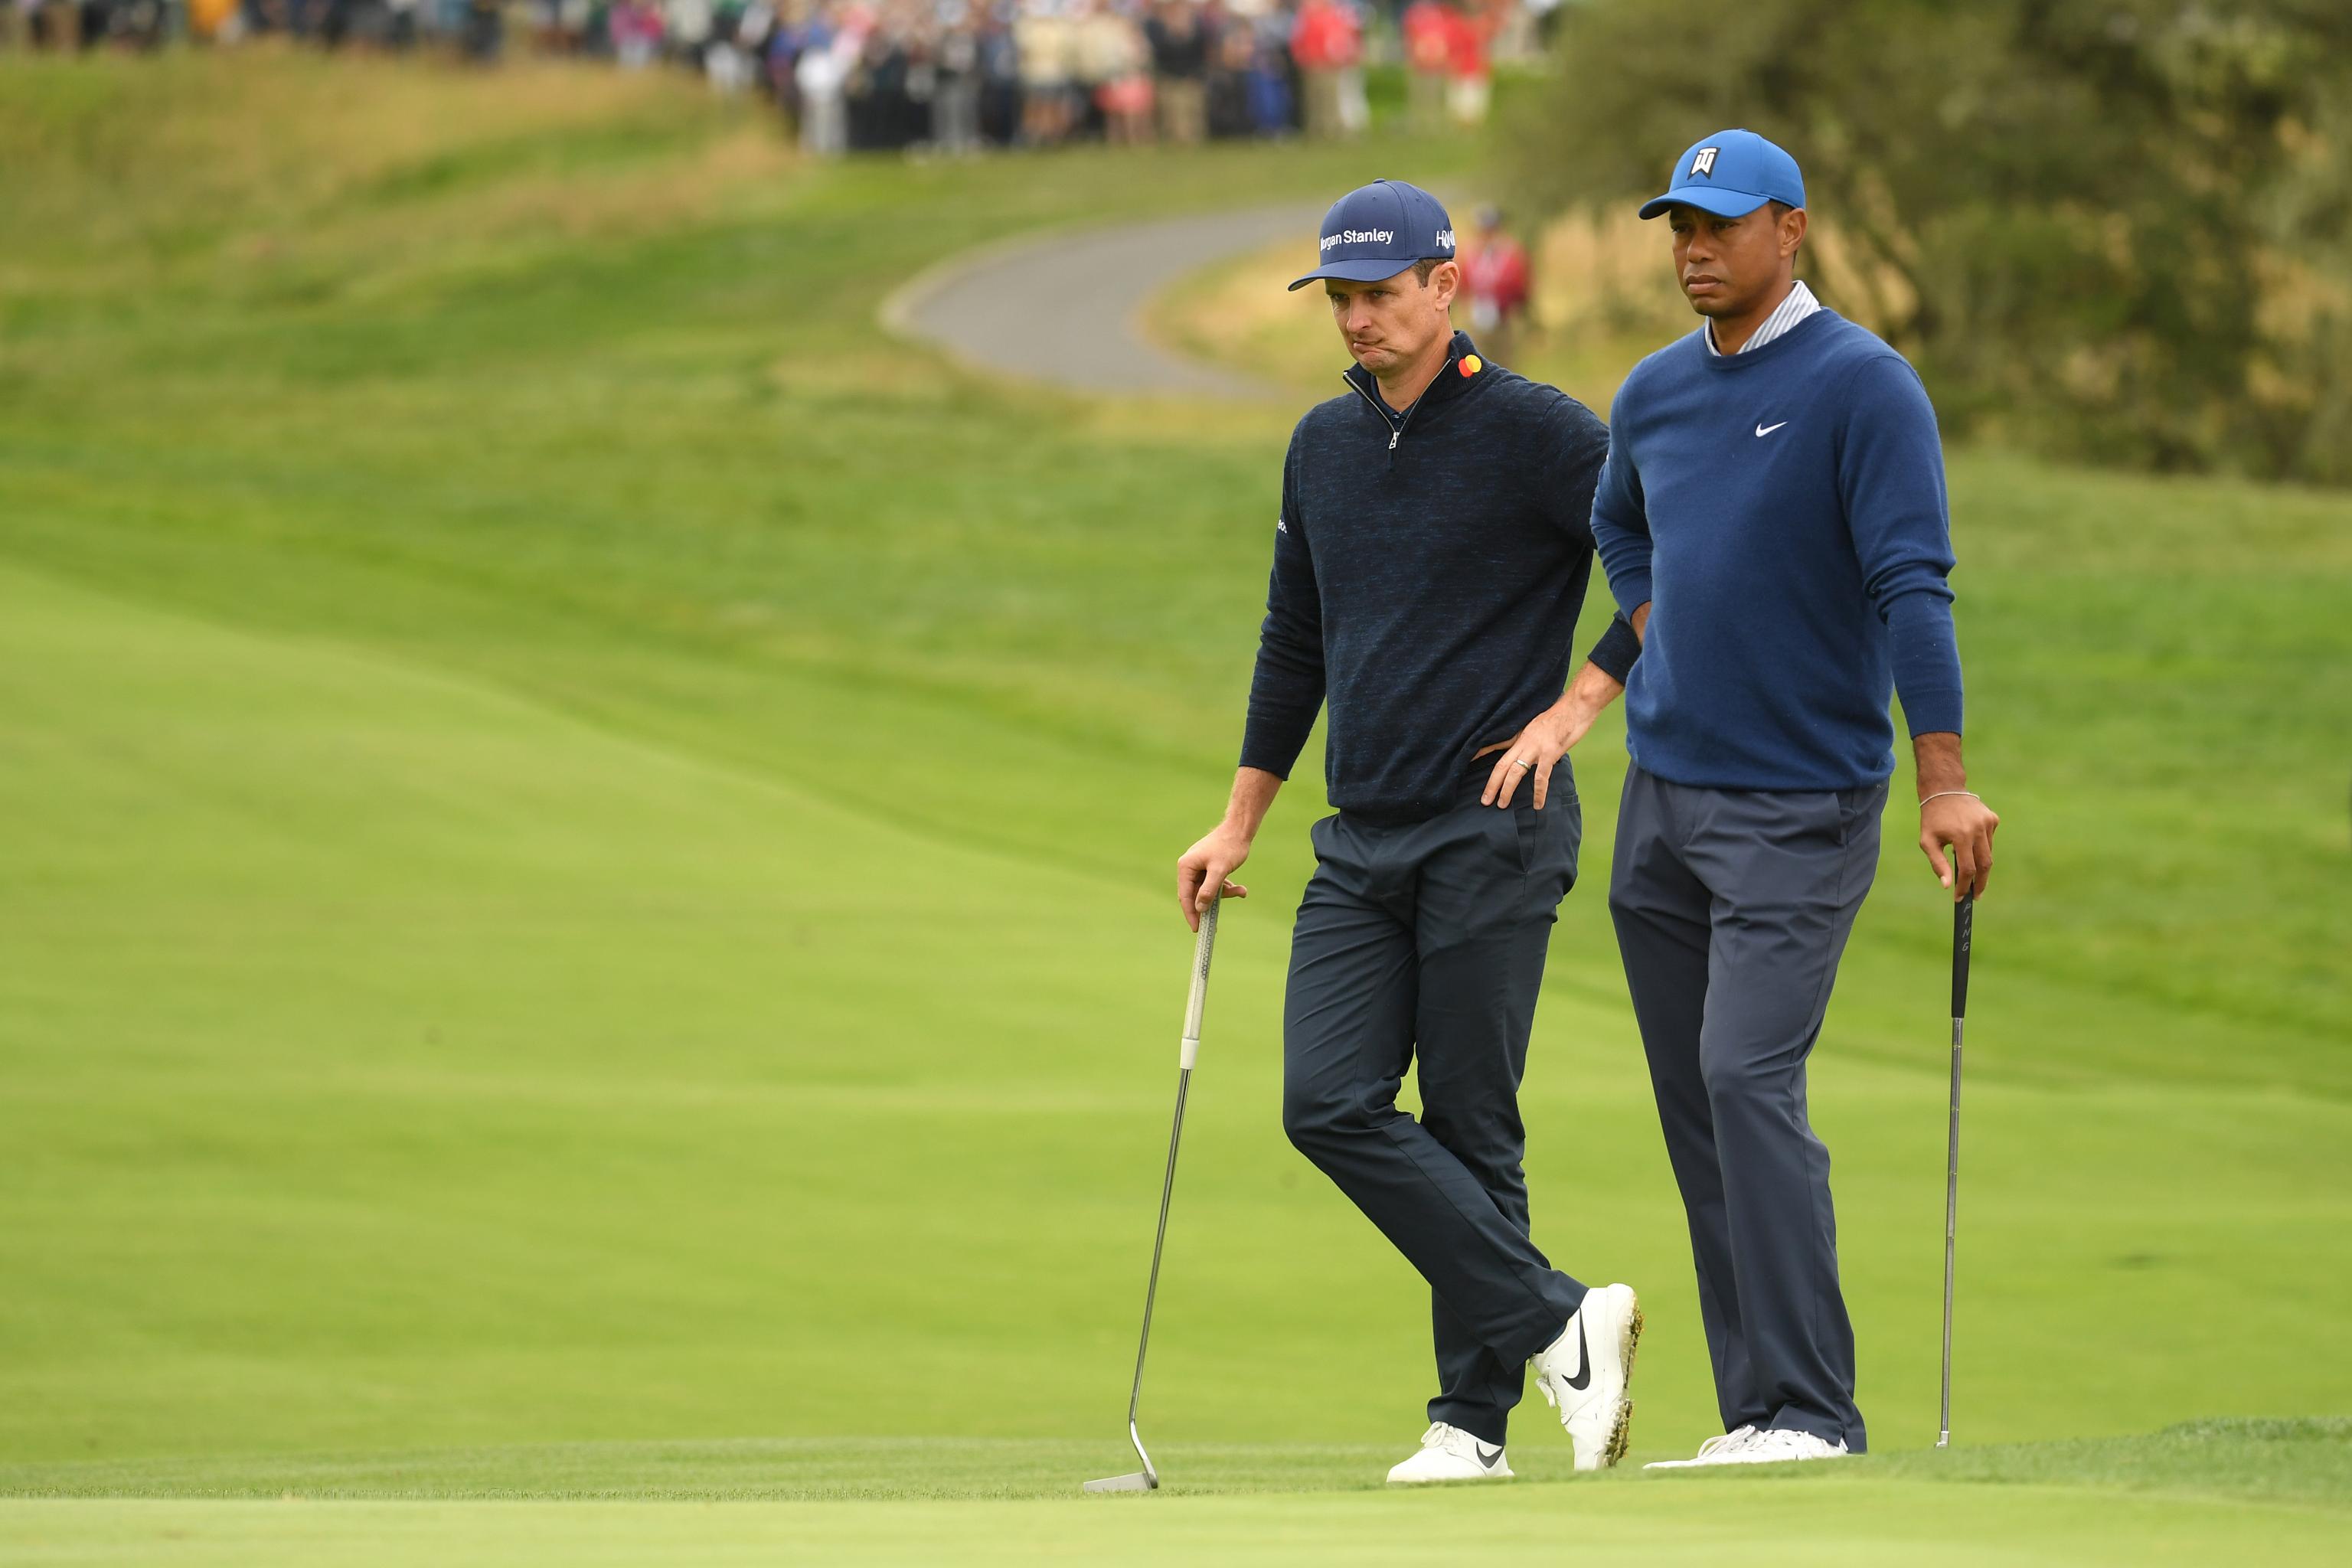 Us Open Leaderboard 2019 Updating Results And Standings For Saturday Bleacher Report Latest News Videos And Highlights